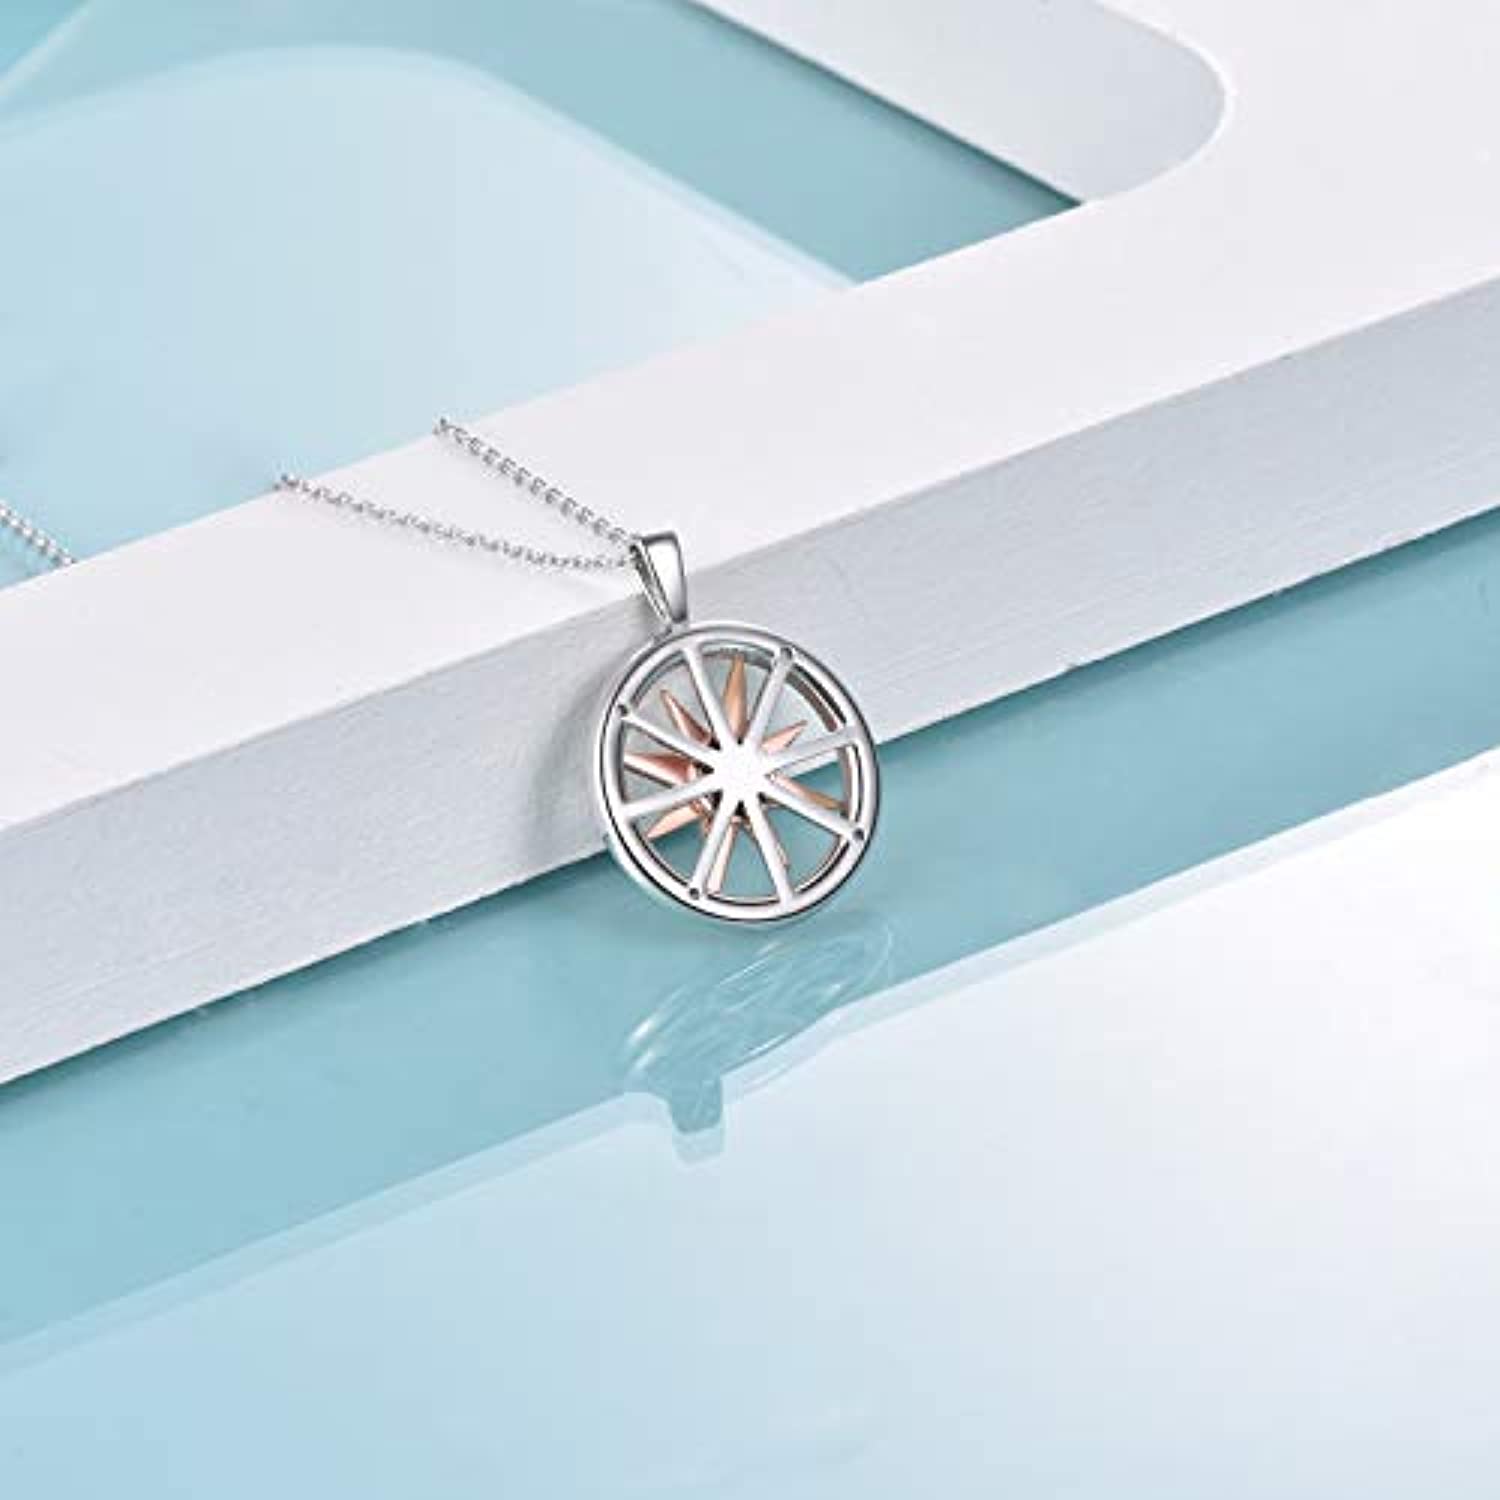 Graduation Gift for Her, Sterling Silver Compass Necklace - MarciaHDesigns